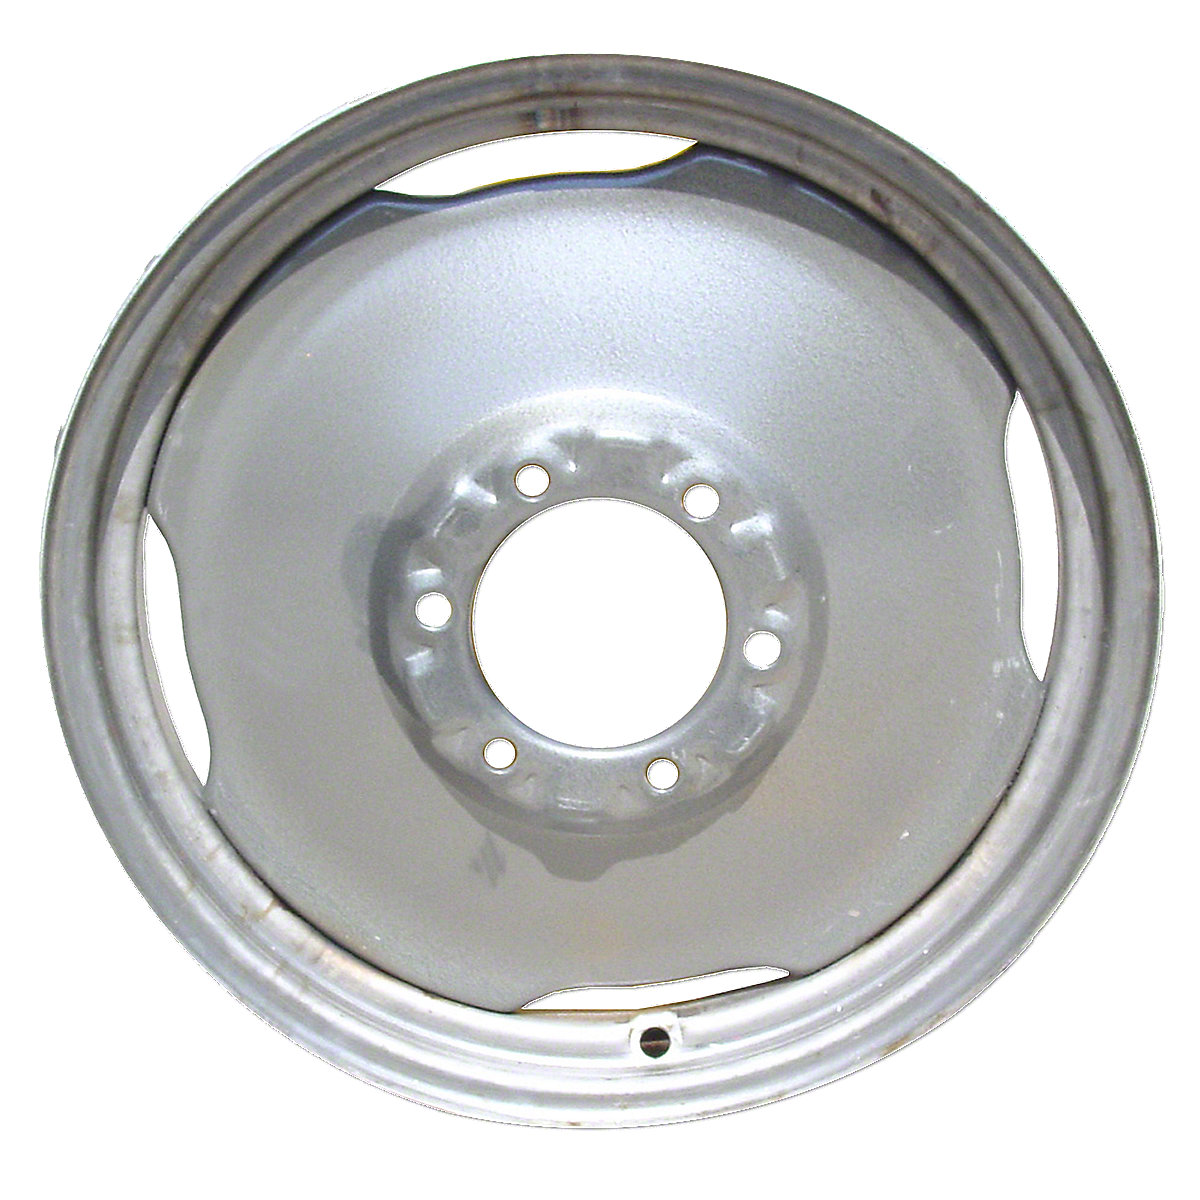 3 X 19 6 Bolt Front Wheel With Small Center For Massey Ferguson: TE20, TEA20, TO20, TO30, TO35, 130, 25, 40, 50, 35, Massey Harris: 50.